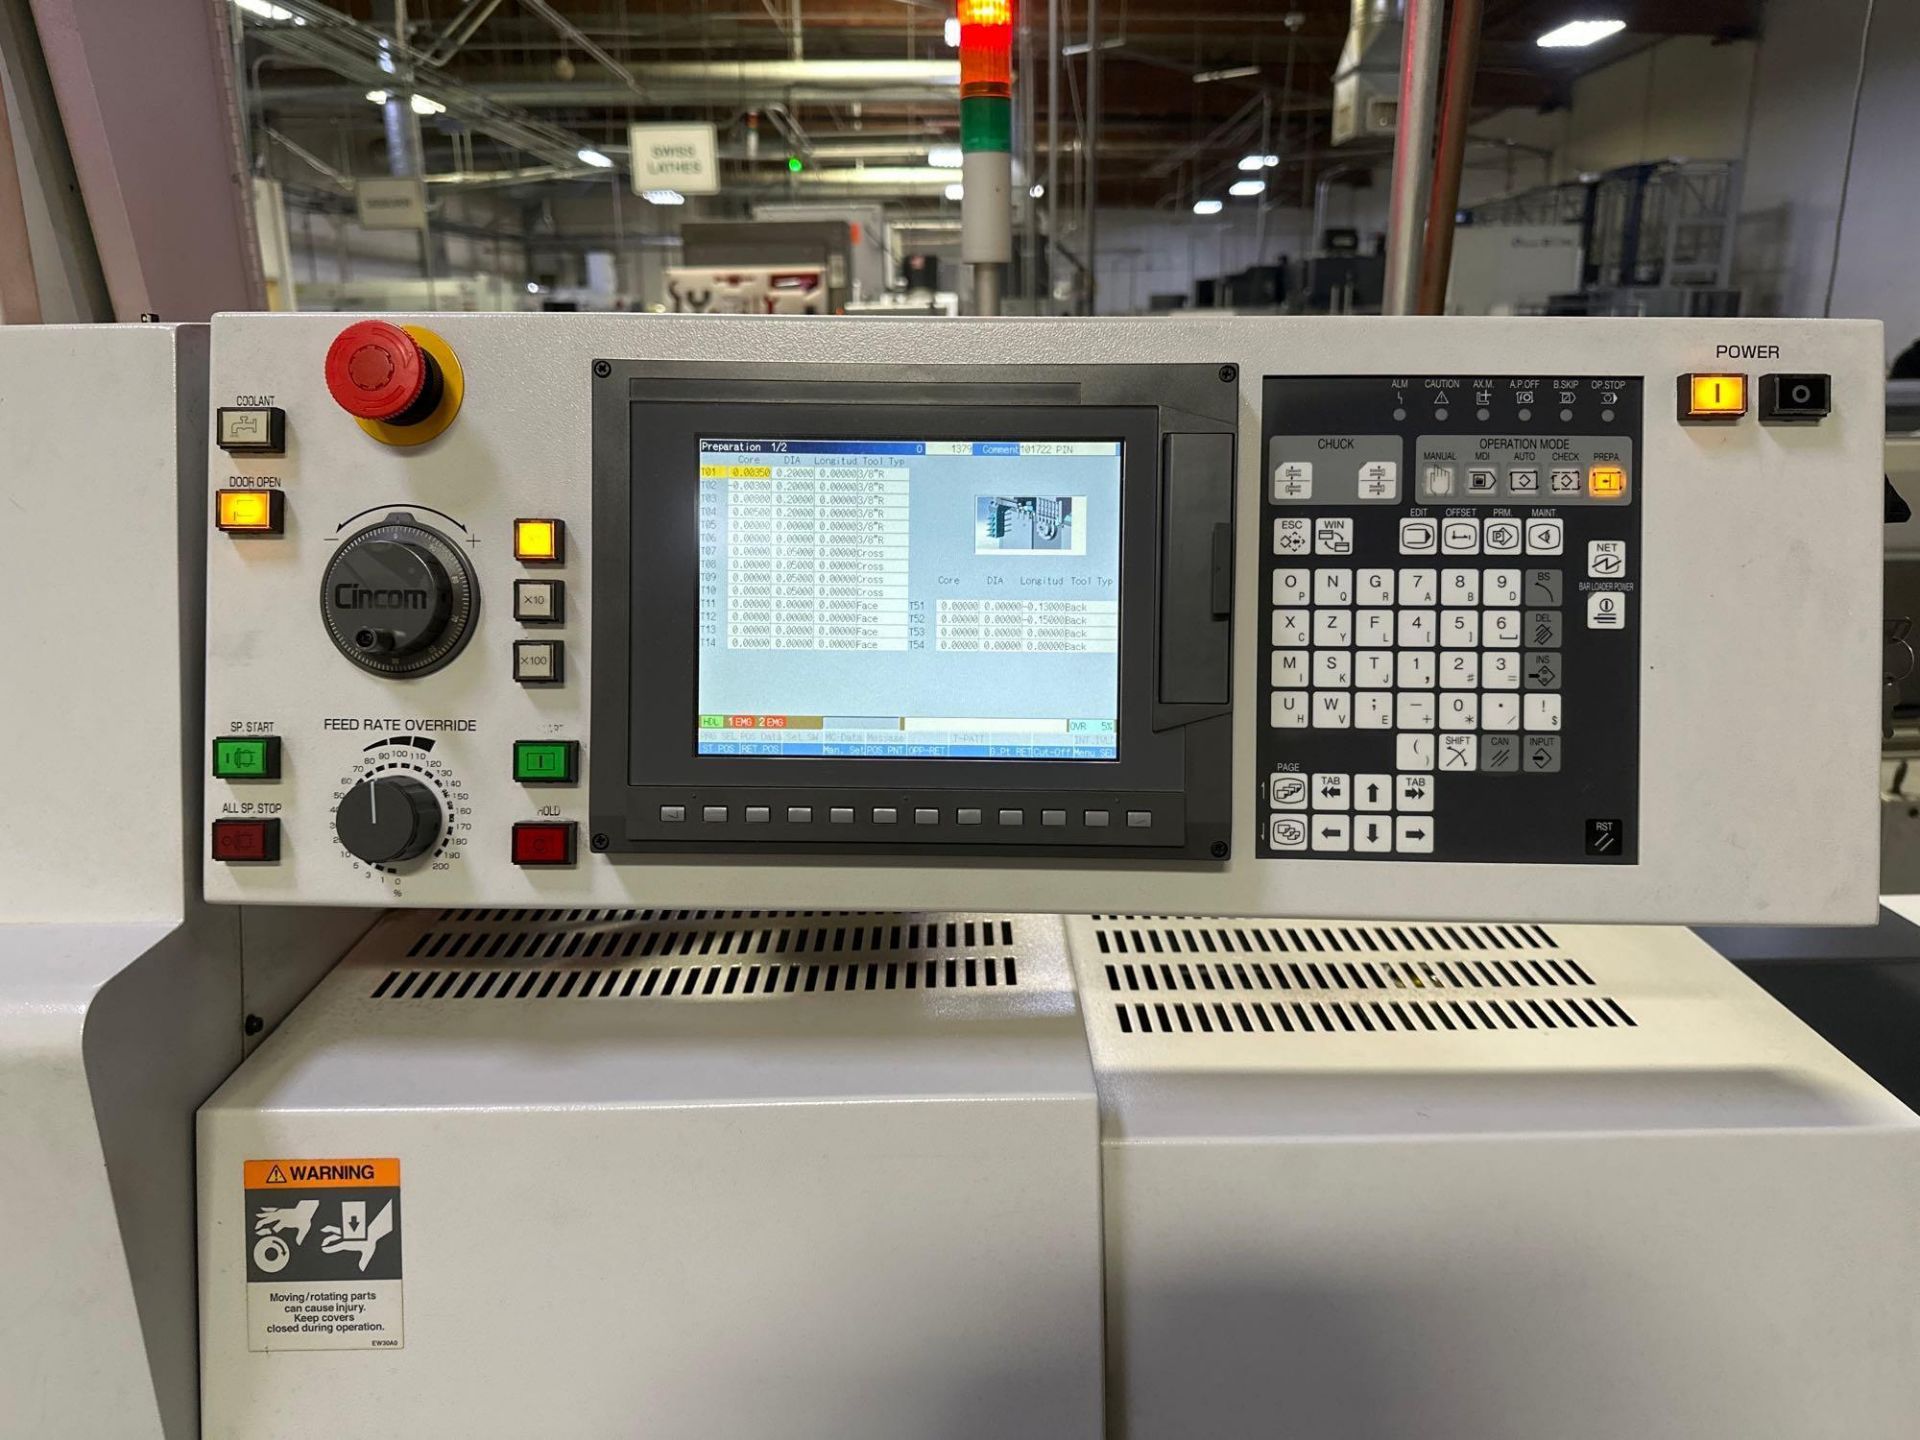 Citizen L12-1M7 6-Axis Swiss CNC Lathe, 18 Station Tool Holders *Delayed for sale in July* - Image 11 of 14